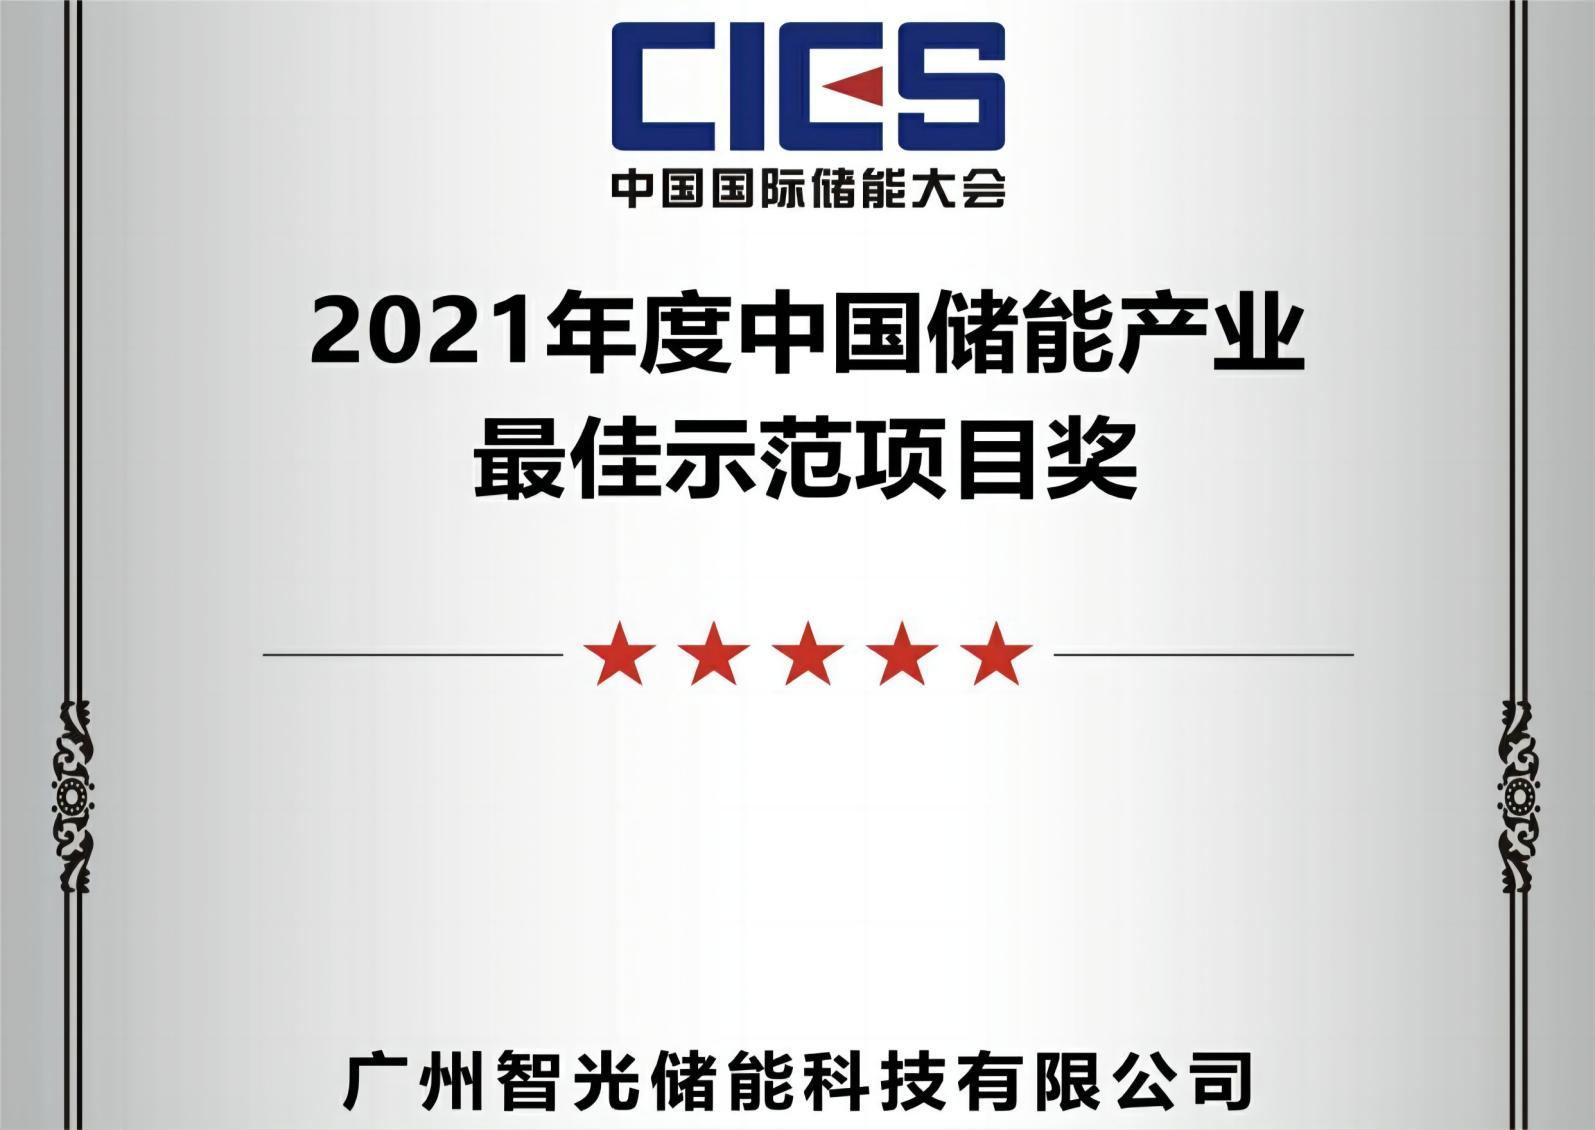 2021 the Best Demonstration Project Award in China's Energy Storage Industry